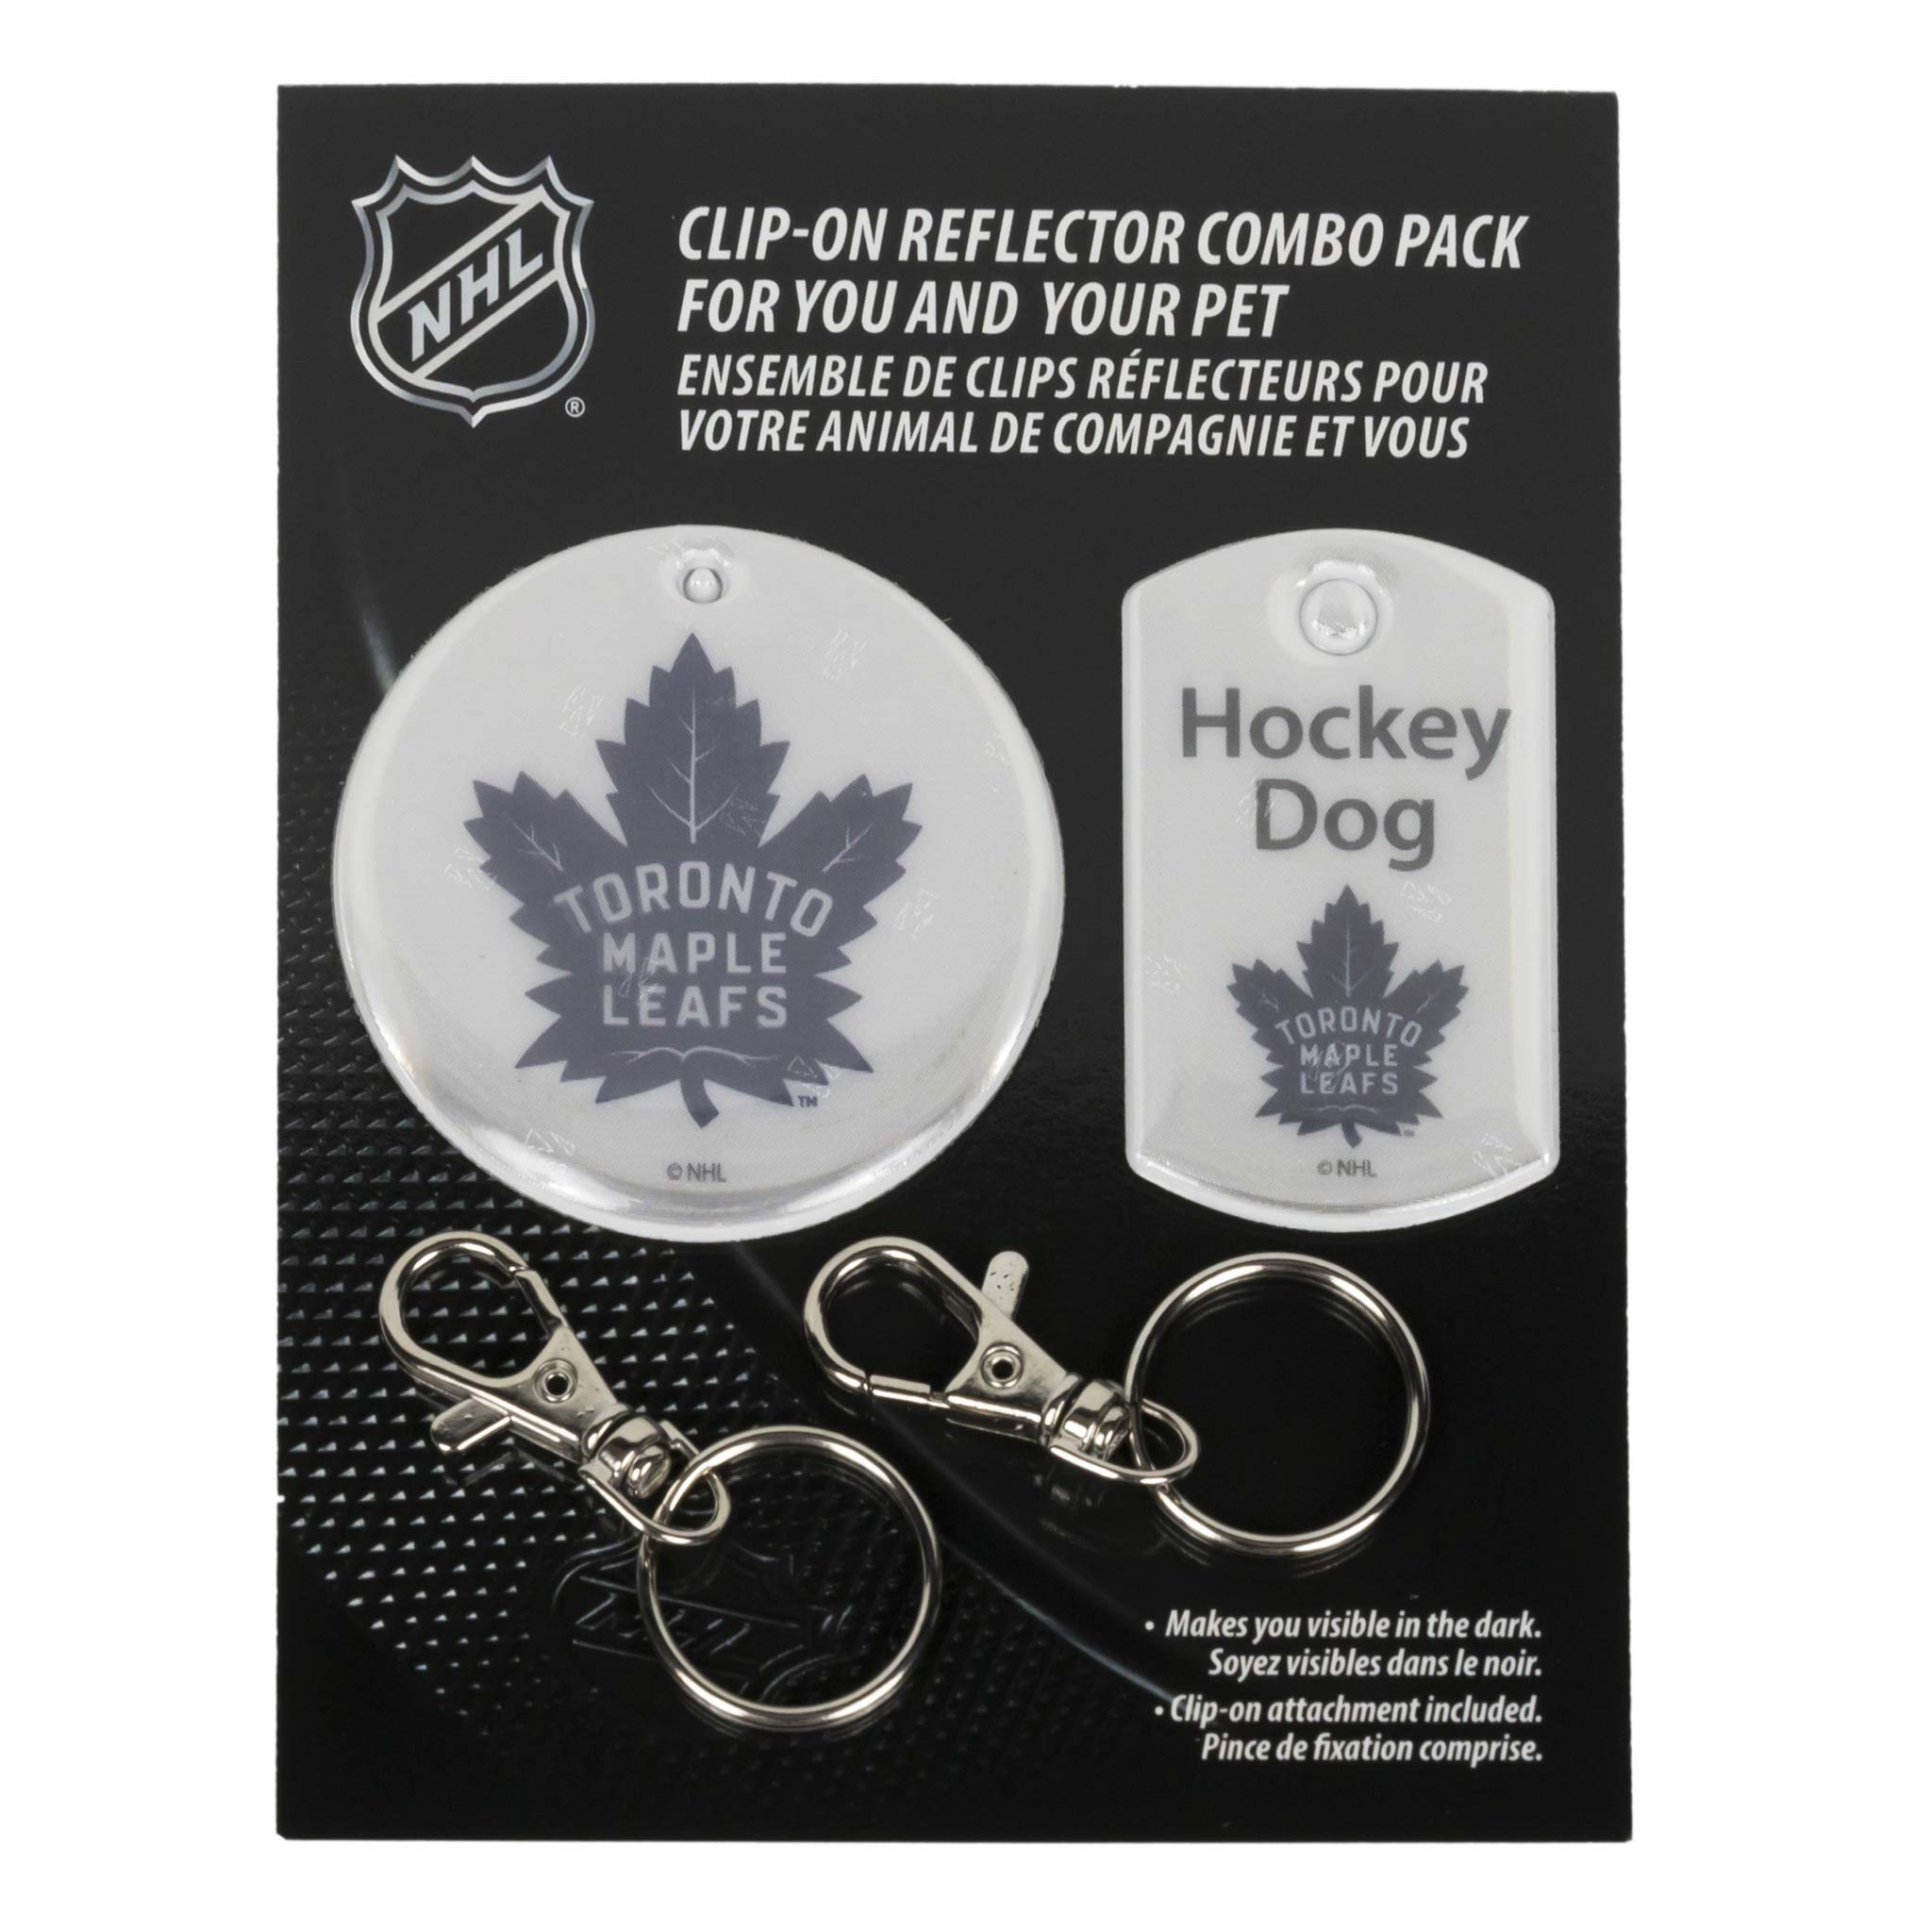 Toronto_Maple_Leafs_Combo_Pack2